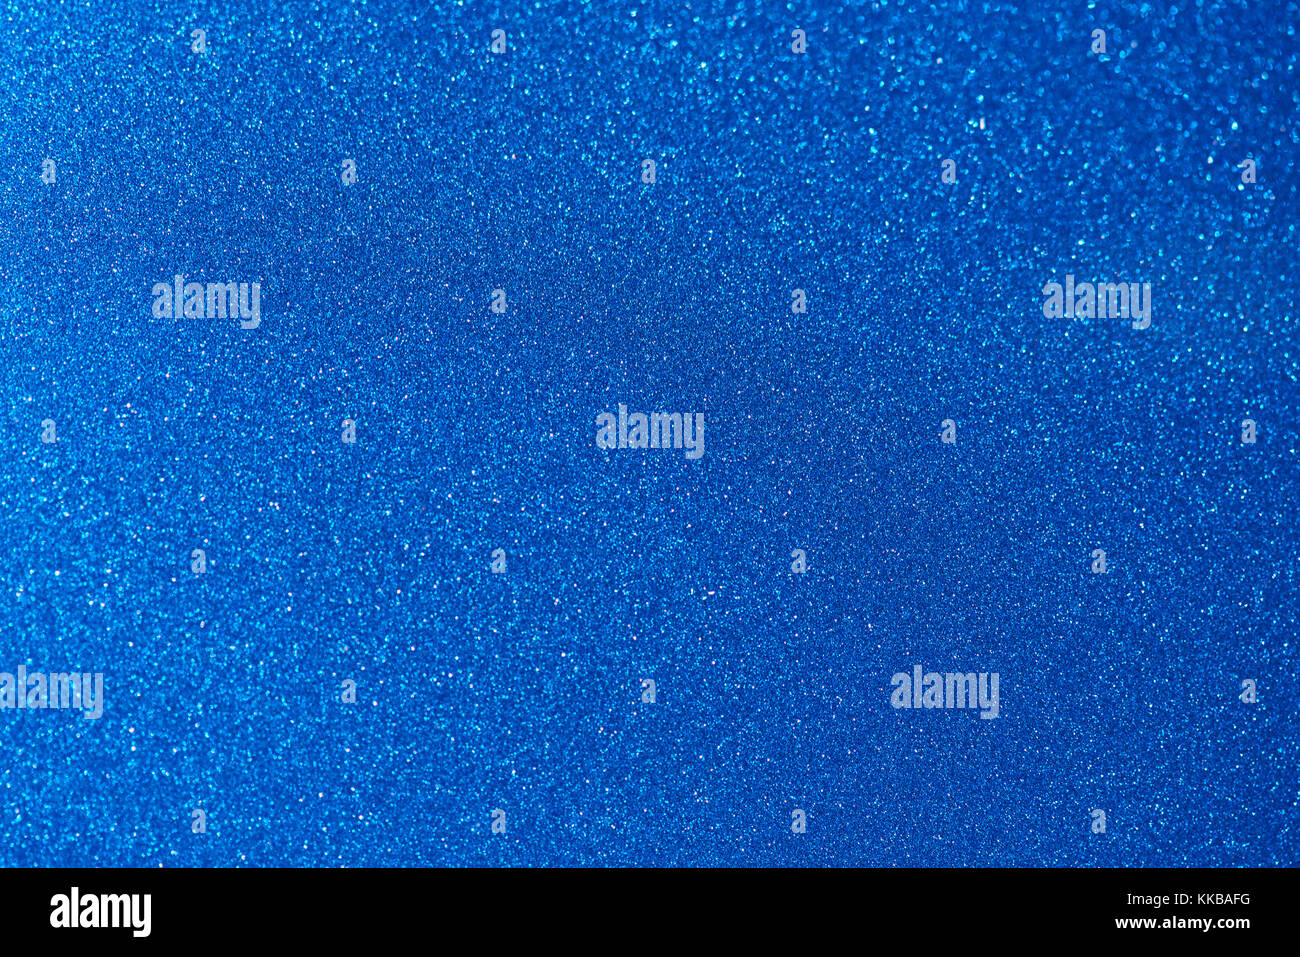 Blue metal texture background. Abstract car paint closeup surface Stock Photo